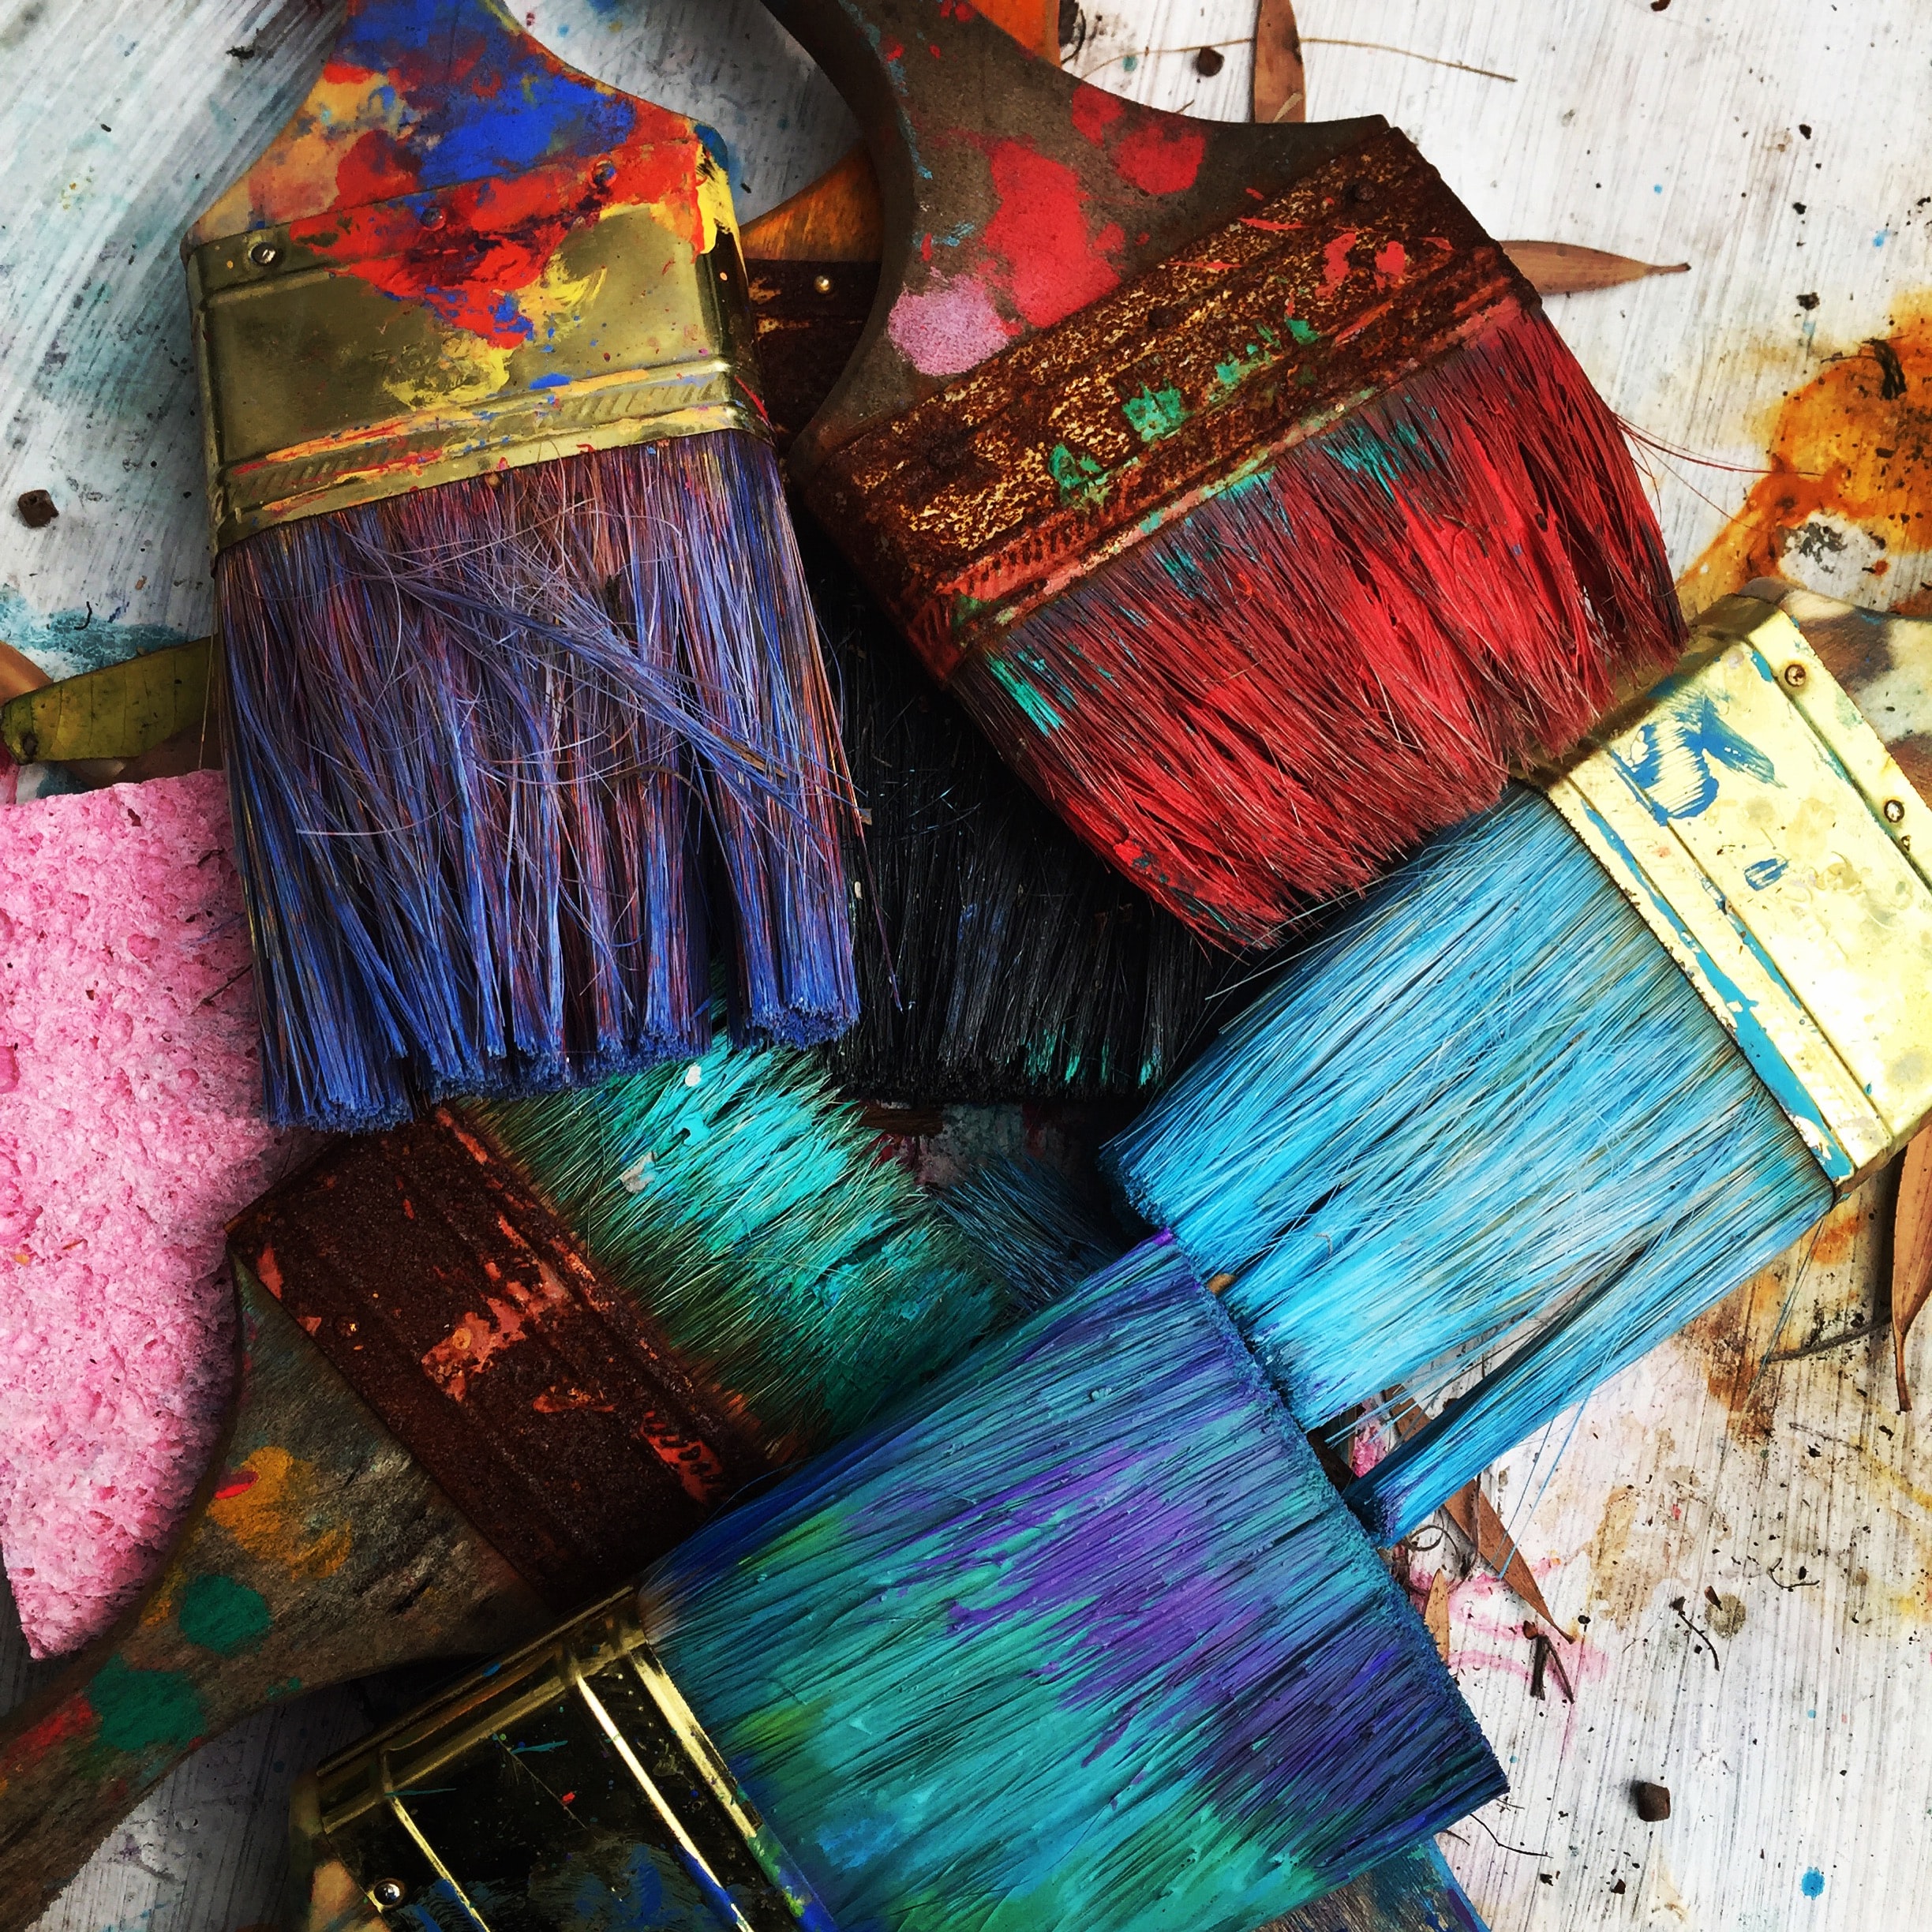 Group of paintbrushes with bristles stained shades of red, purple, blue, and green